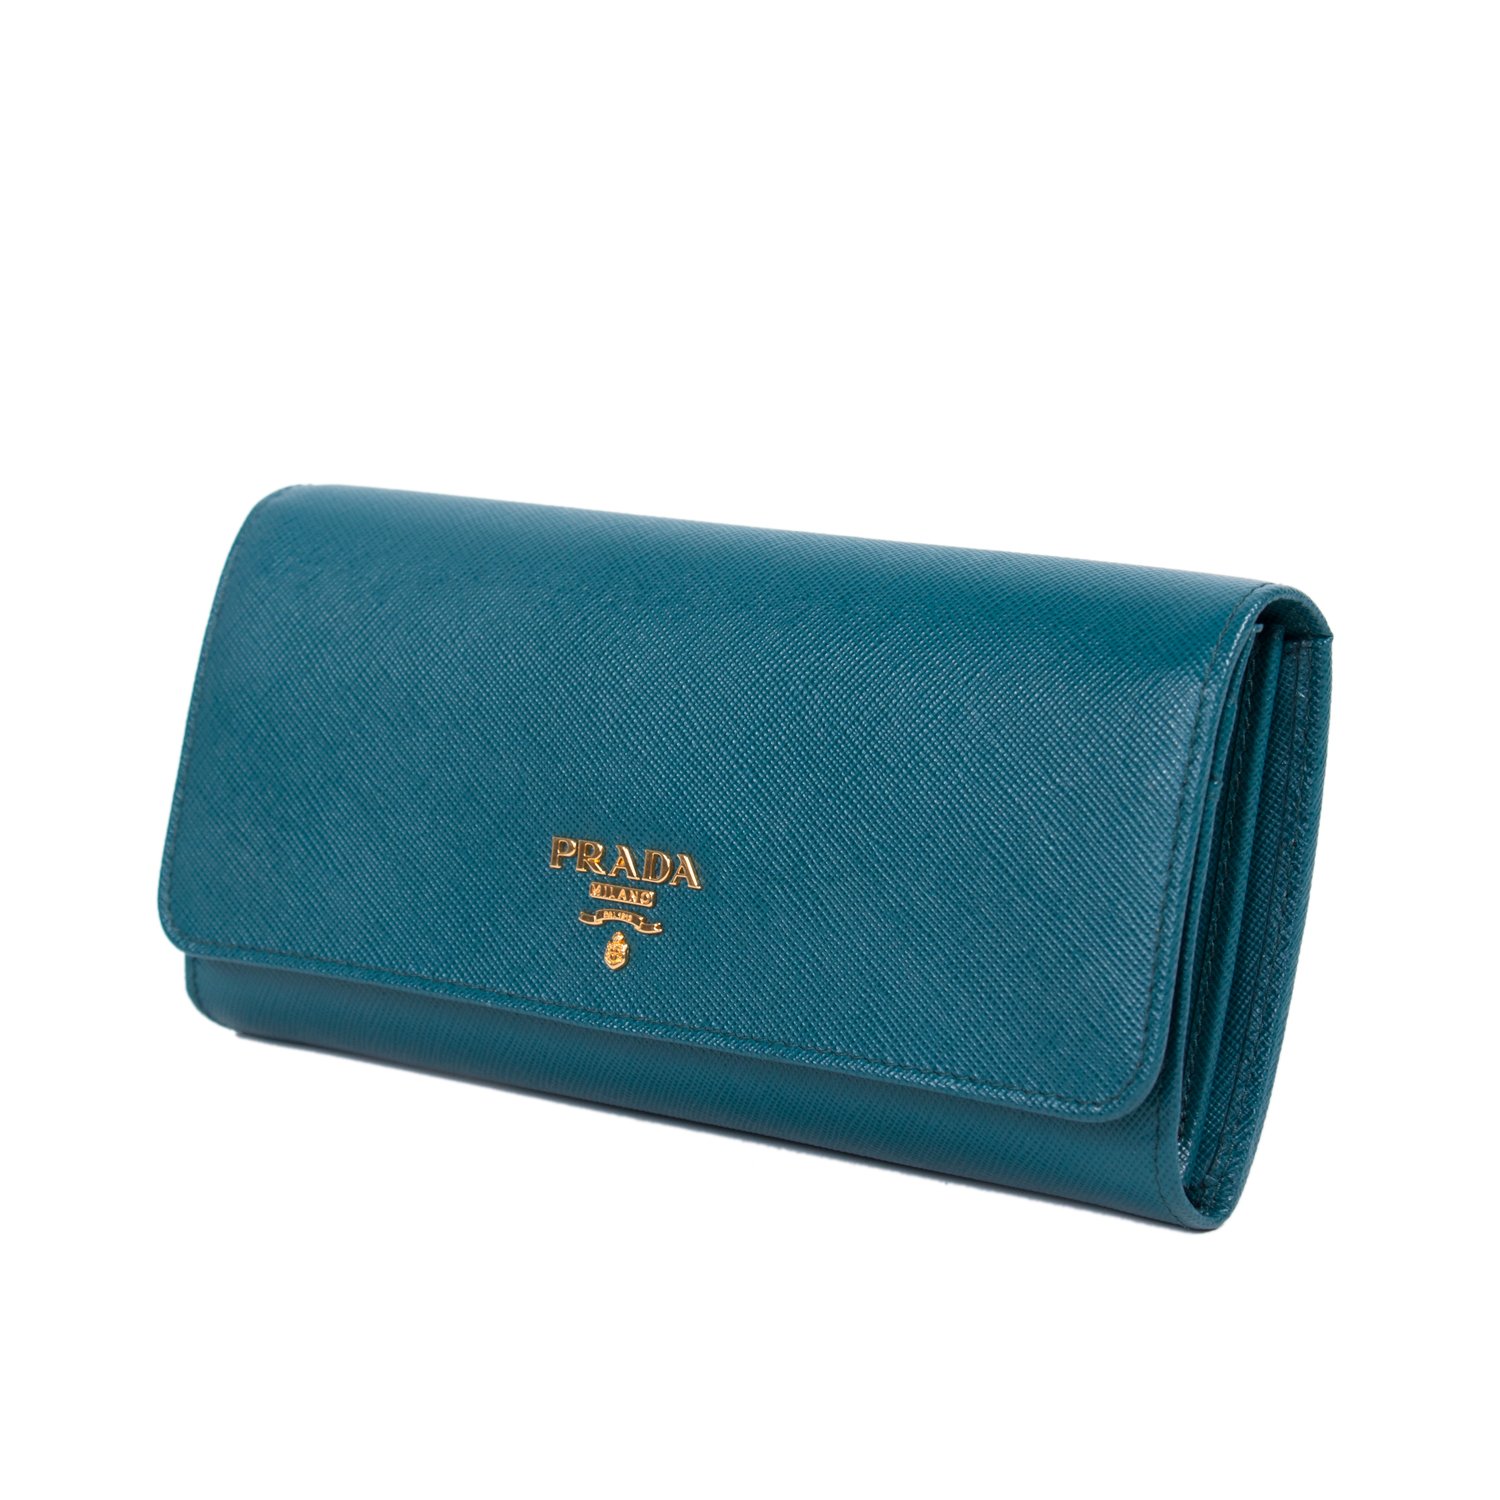 Prada Teal Saffiano Leather Continental Flap Wallet